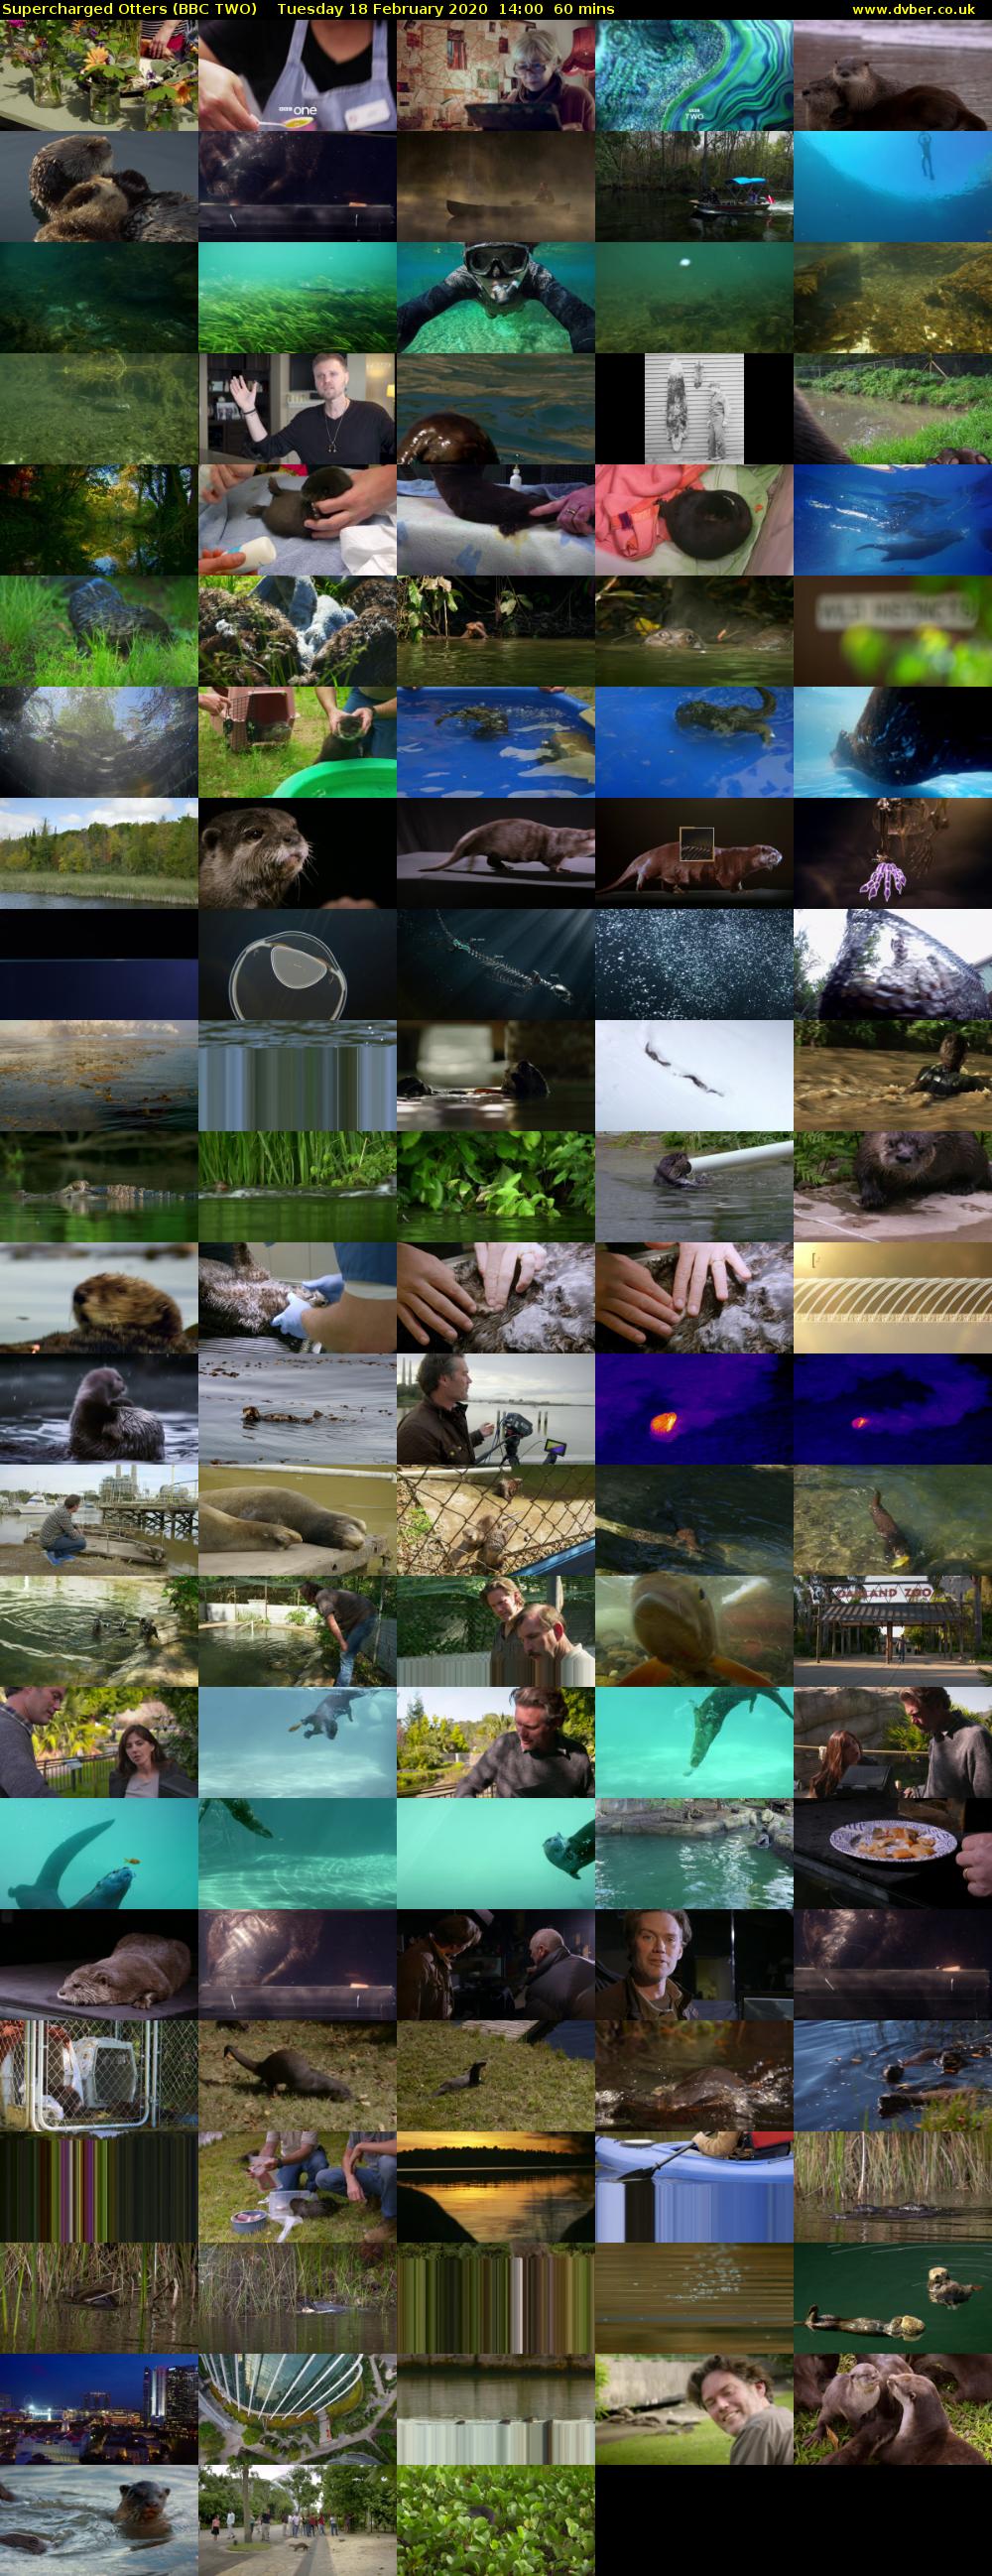 Supercharged Otters (BBC TWO) Tuesday 18 February 2020 14:00 - 15:00